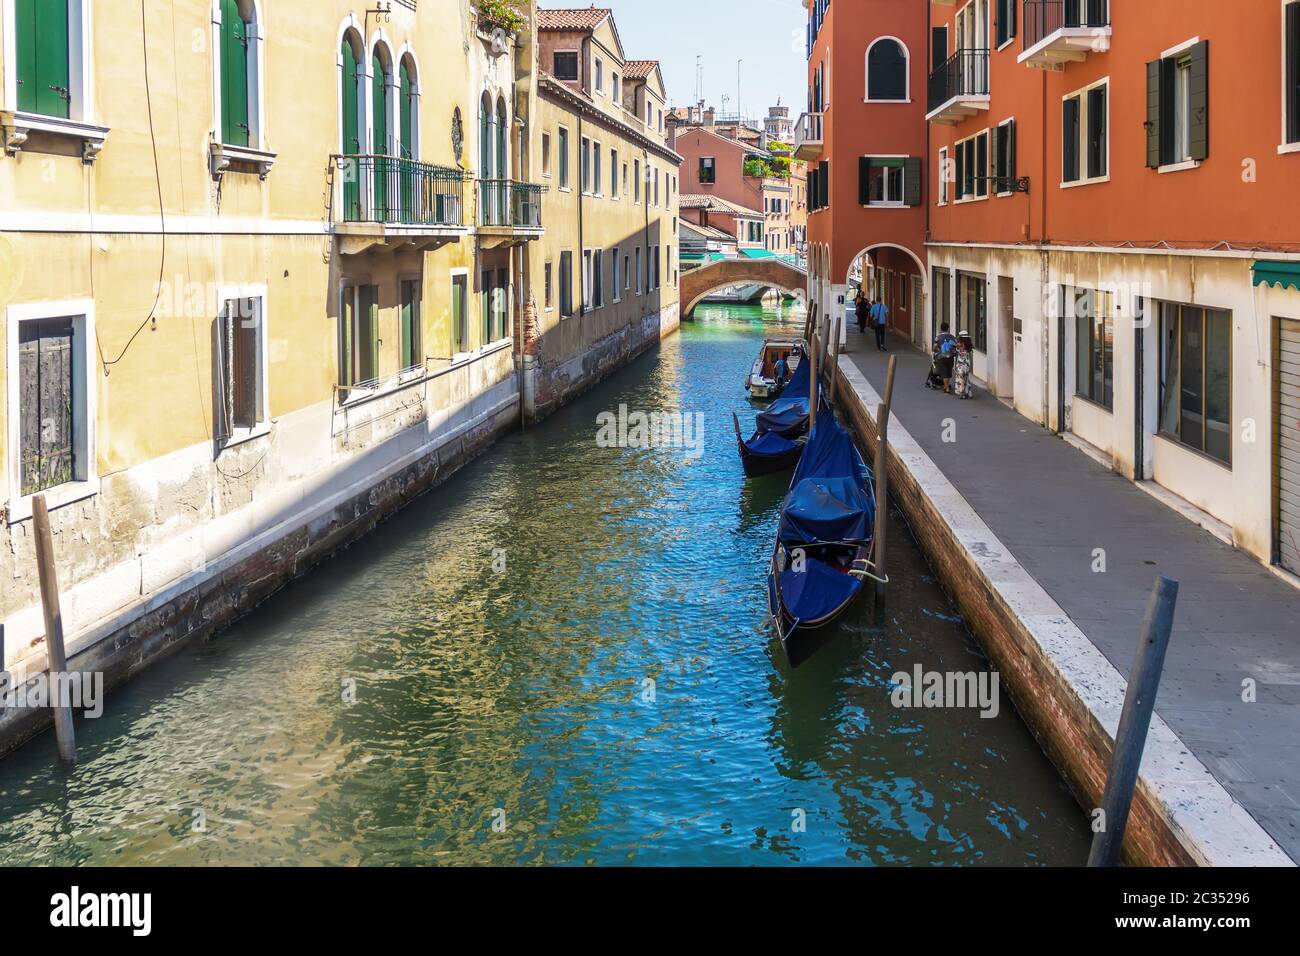 Venice canal with gondolas, peaceful view, Italy. Stock Photo